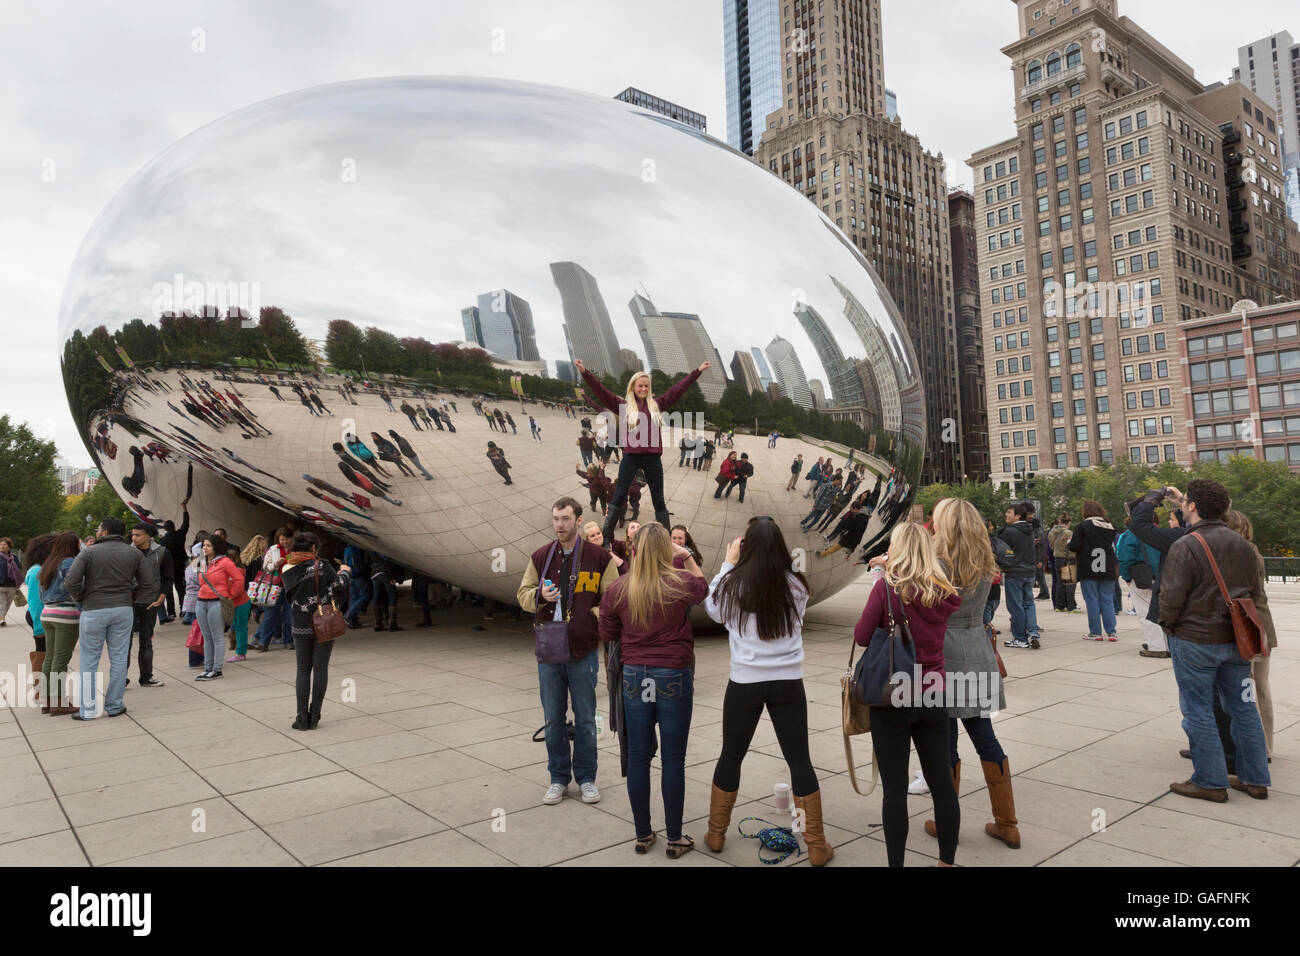 University of Minnesota cheerleaders in the front the Cloud Gate sculpture in Chicago, Illinois. Stock Photo